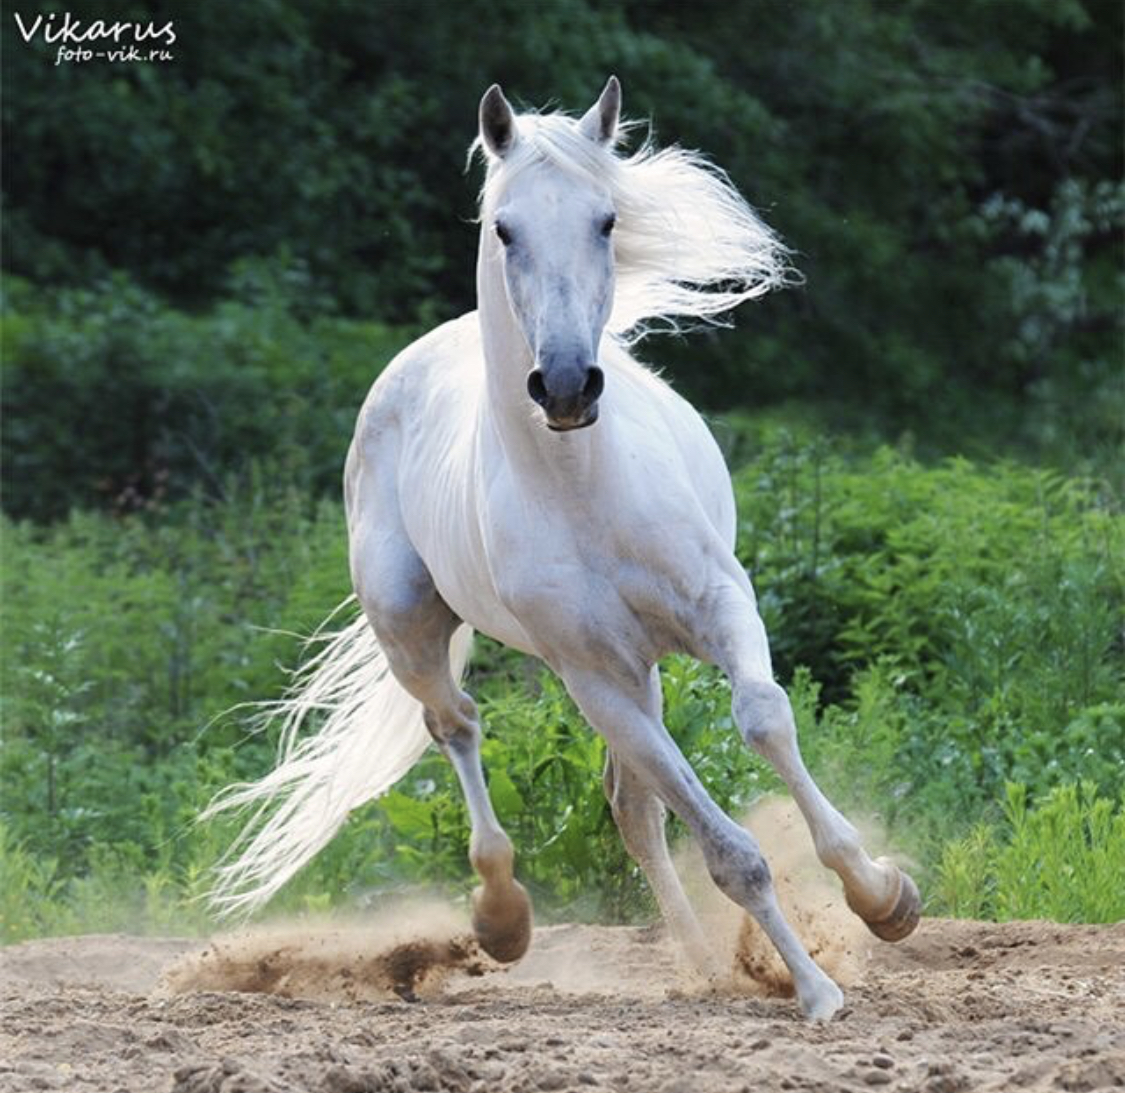 A white horse running in the mountain